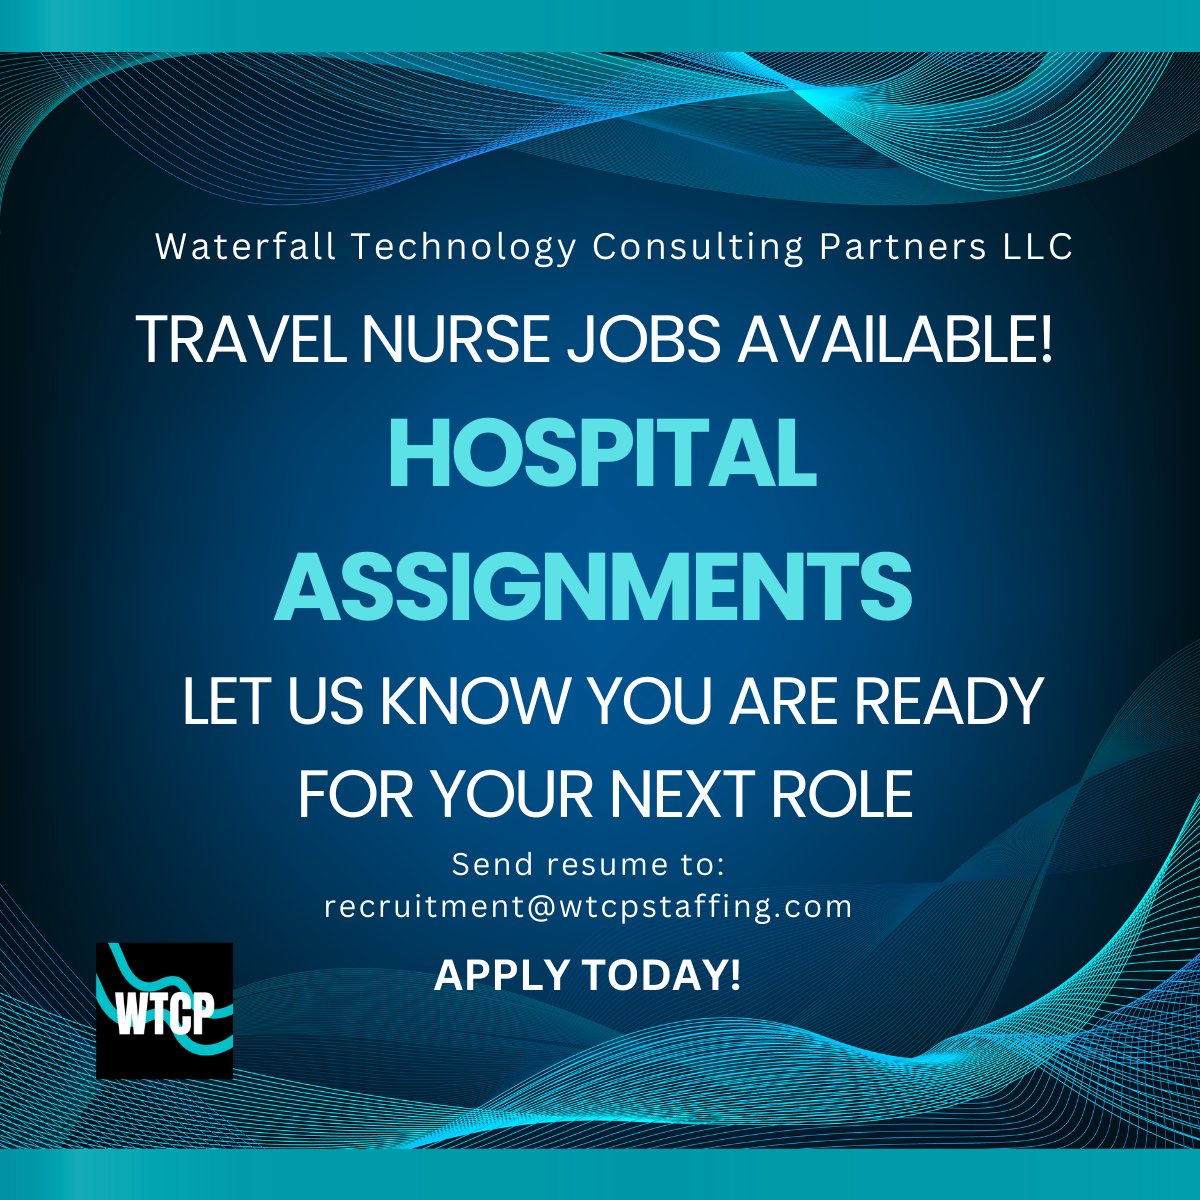 TRAVEL NURSES ~ Add us to your email list as an additional resource for your next contract ~ we want to compete for your business ❕❕ recruitment@wtcpstaffing.com
#travelnurse #travelrn #nurselife #rnlife #rncareers #travelrnjobs #rnjobs